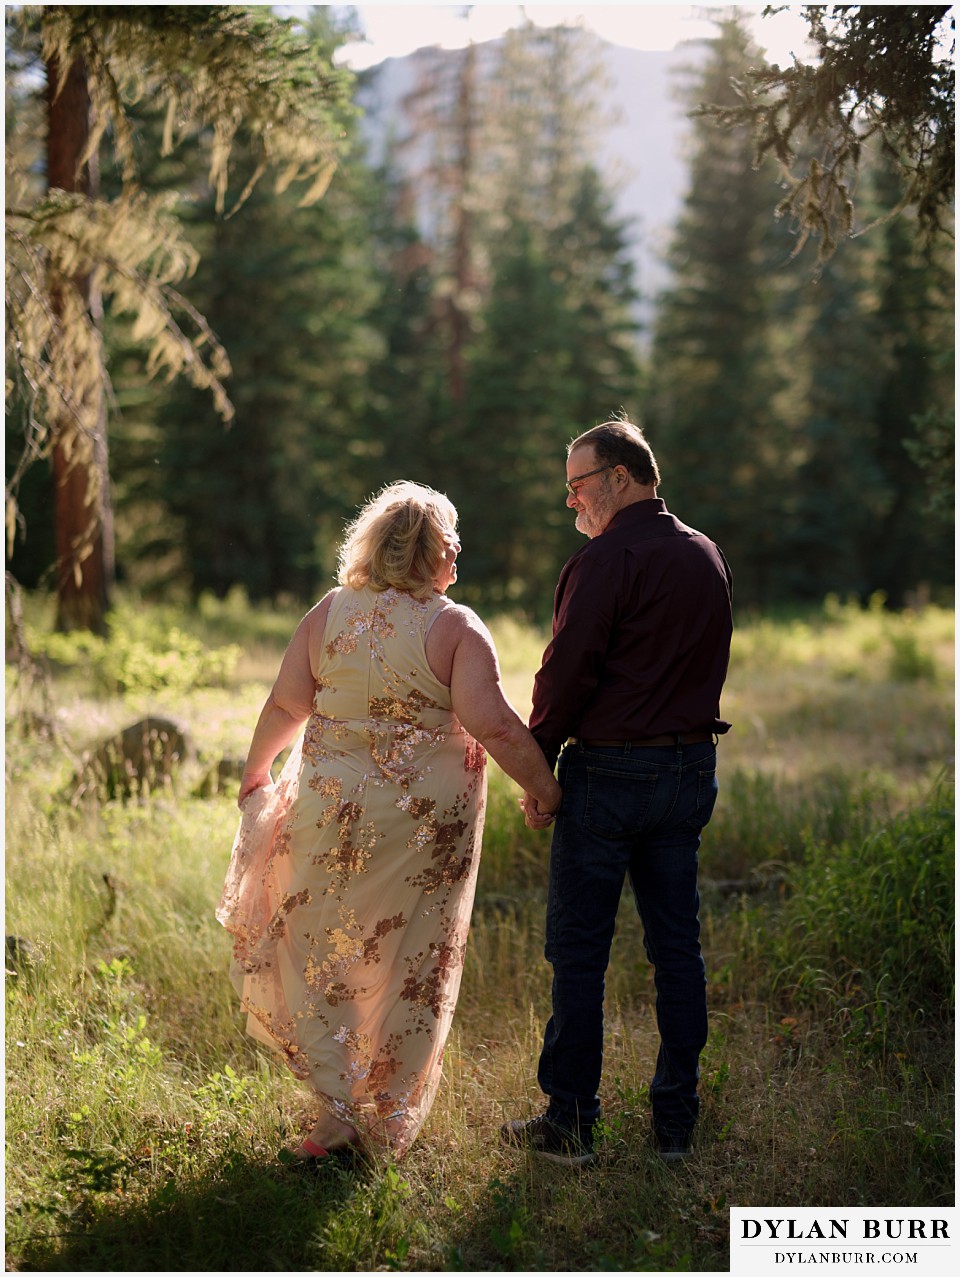 eloping in the forest near pagosa springs colorado